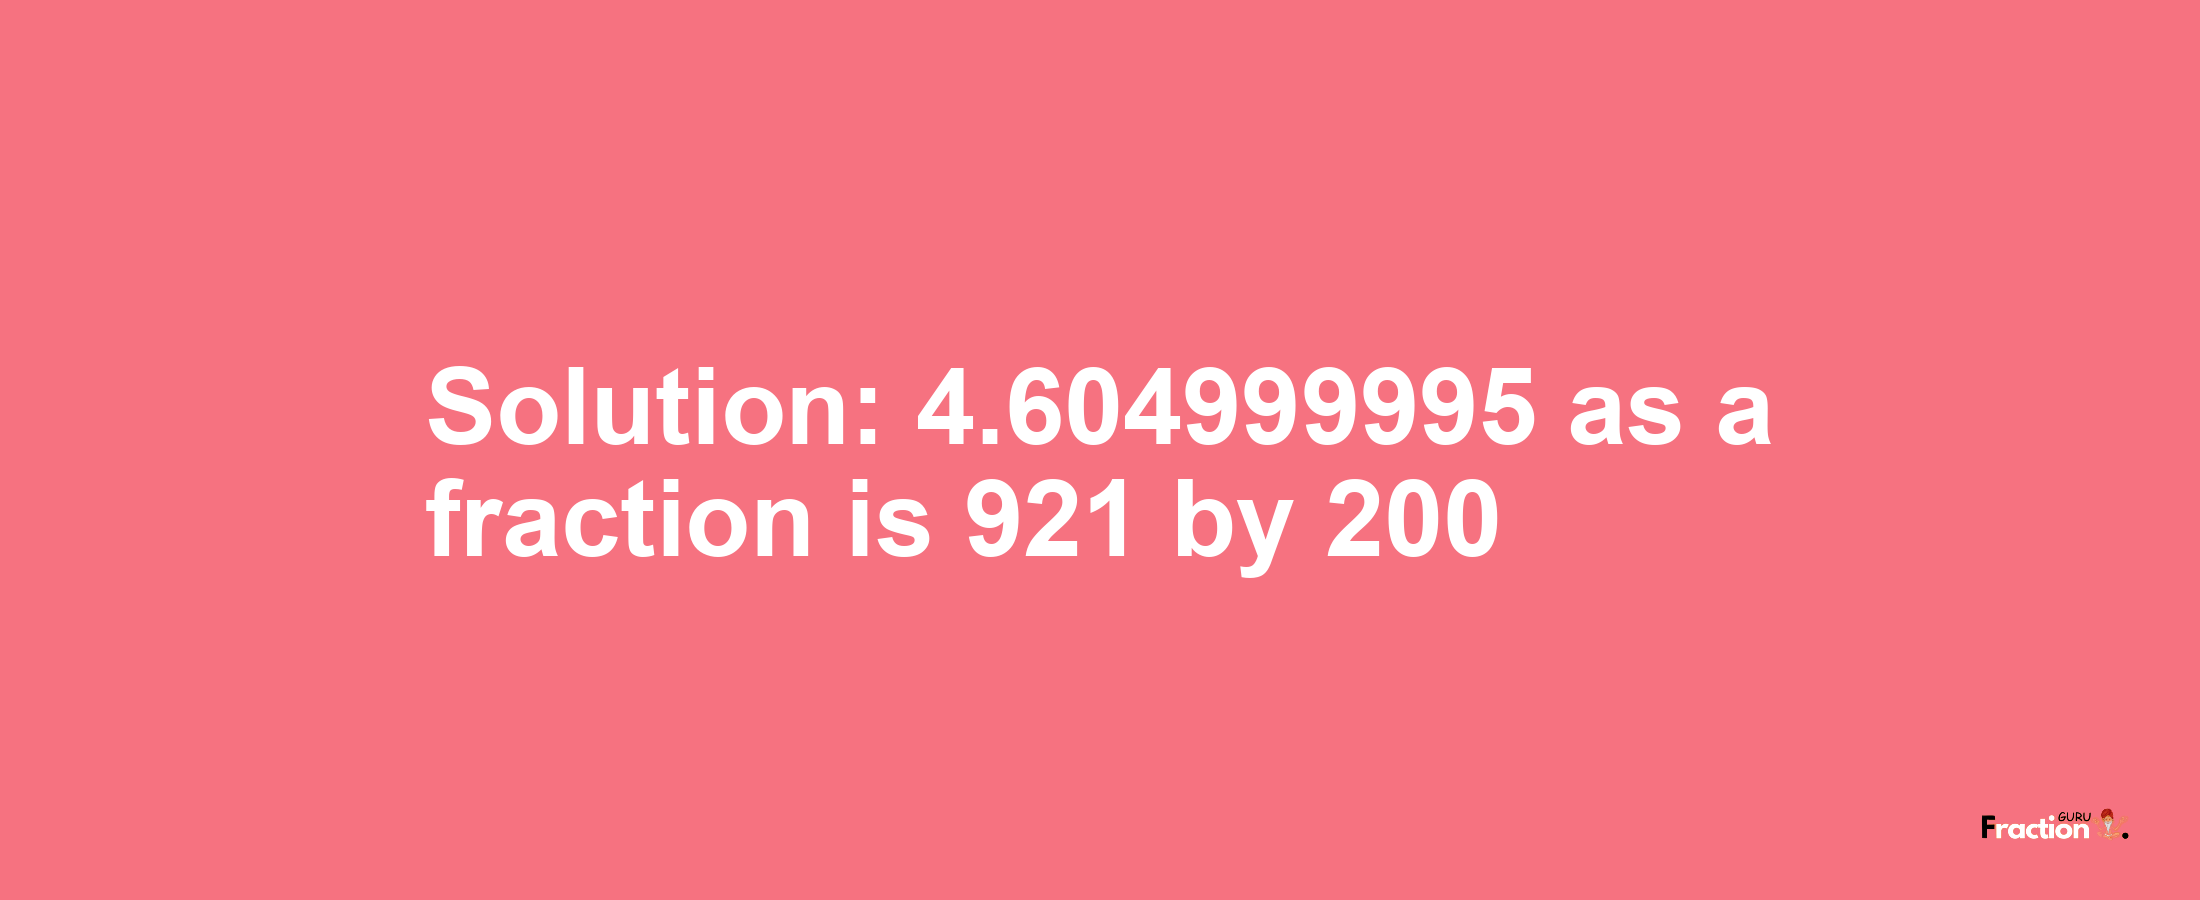 Solution:4.604999995 as a fraction is 921/200